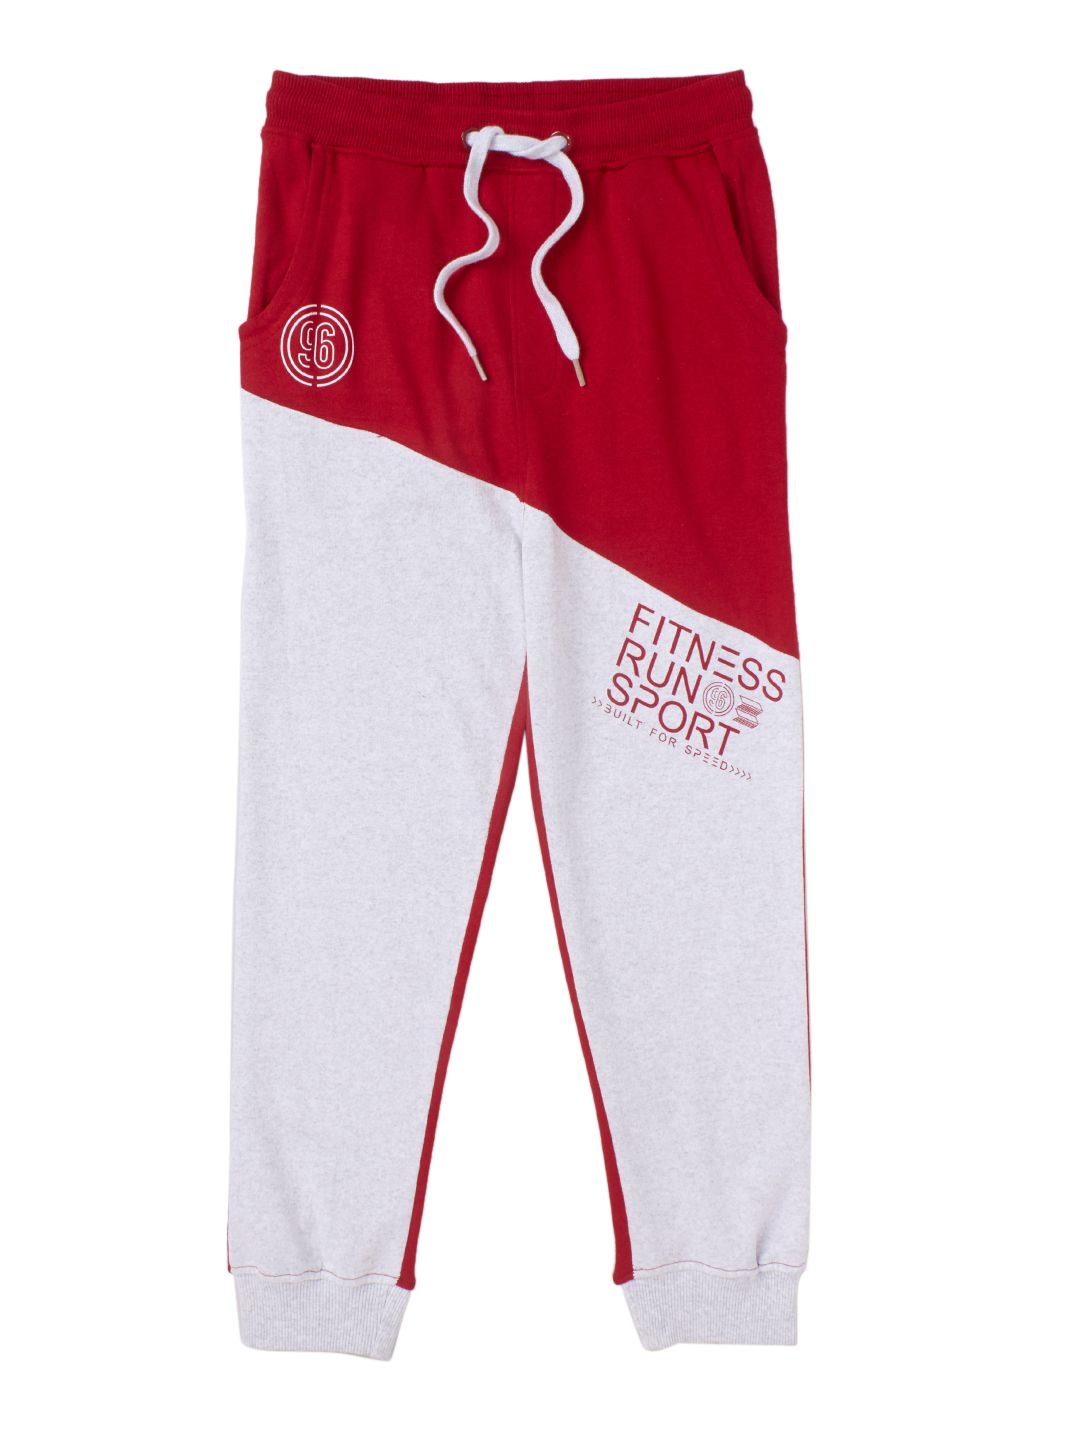 Boys Grey Red Track Pant